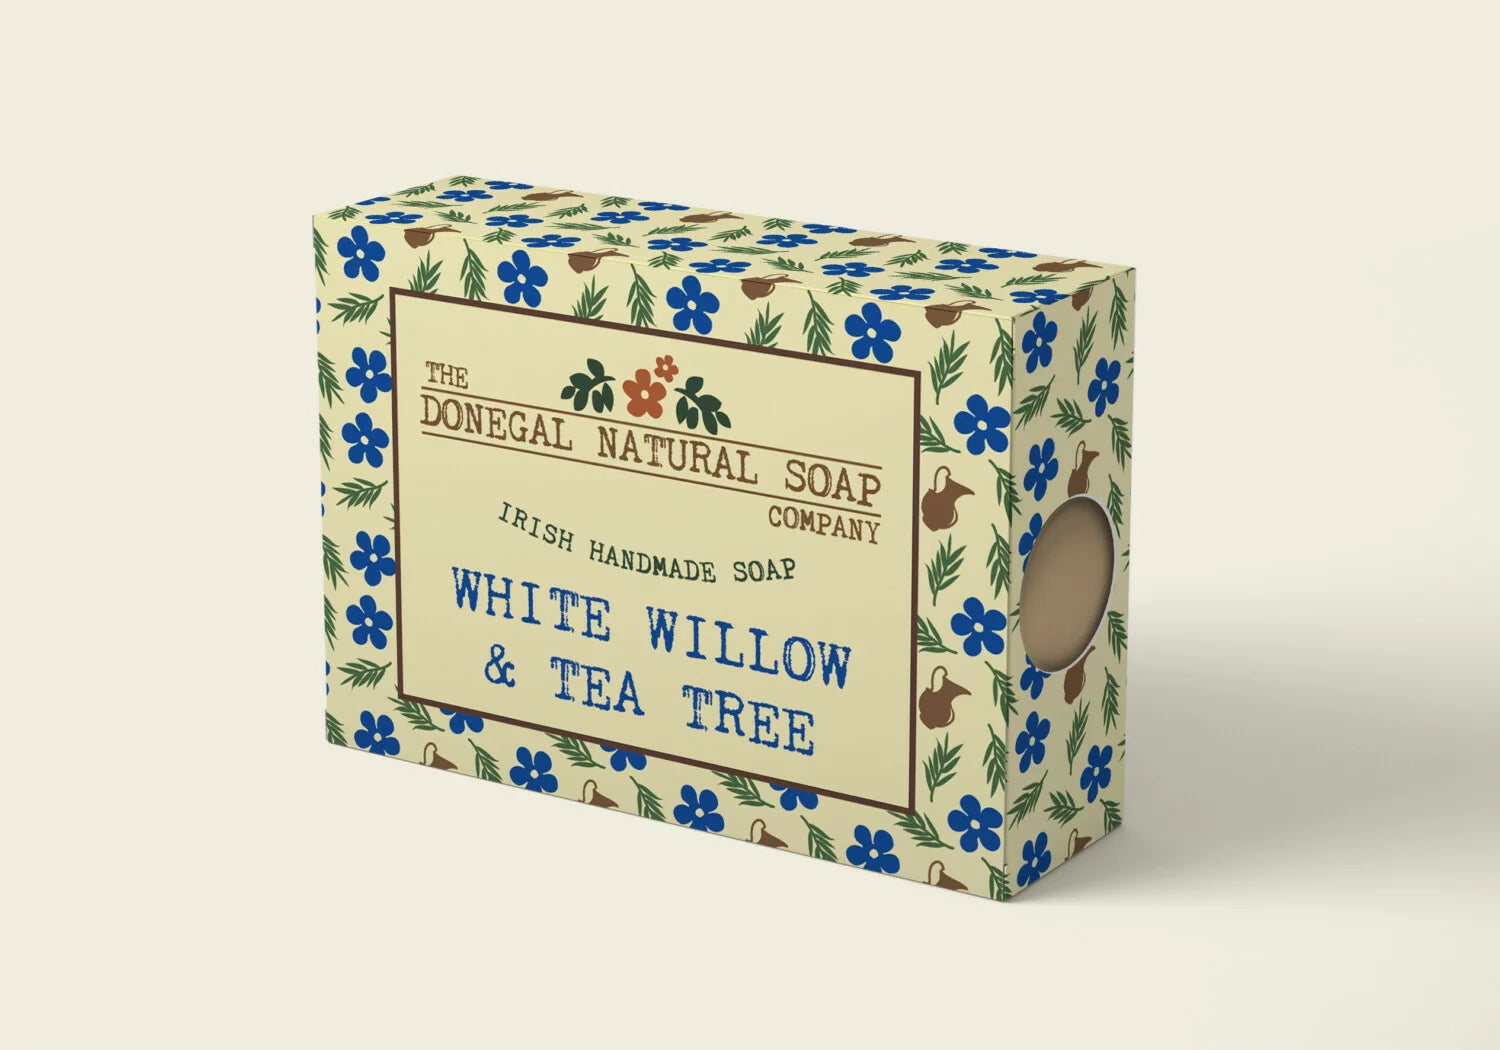 Whit Willow & Tea Tree Soap by The Donegal Natural Soap Company